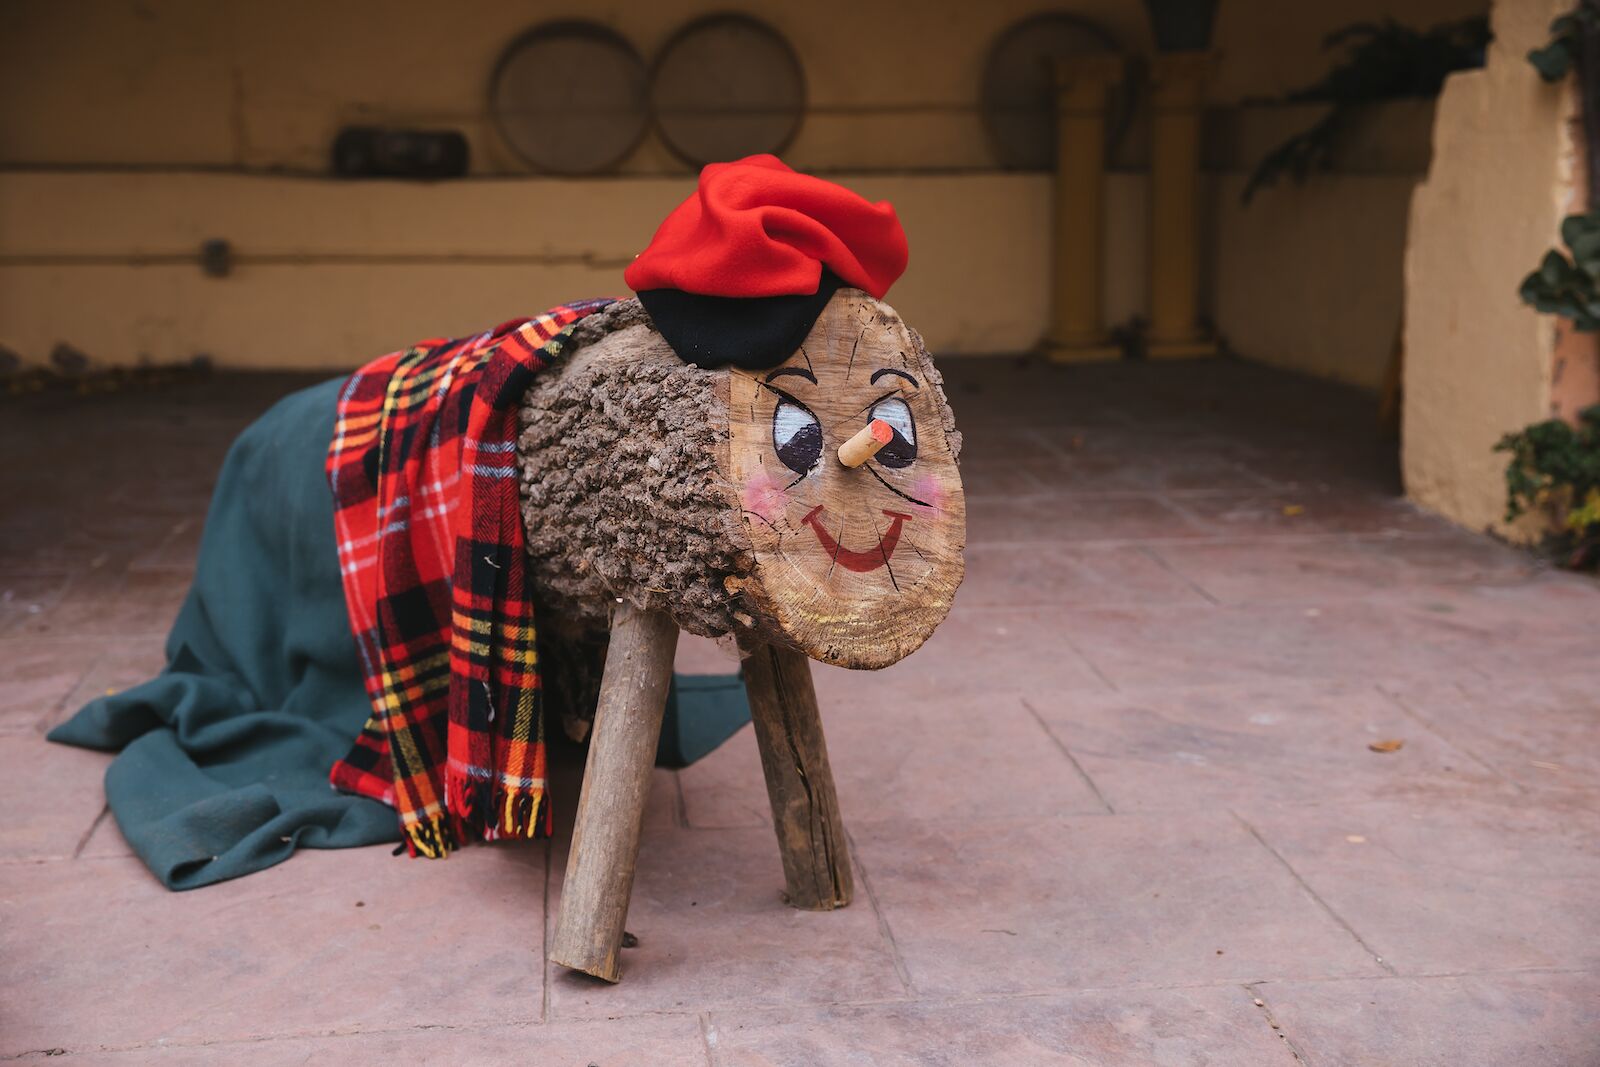 Caga Tio is a typical Christmas character of Catalonia, Spain